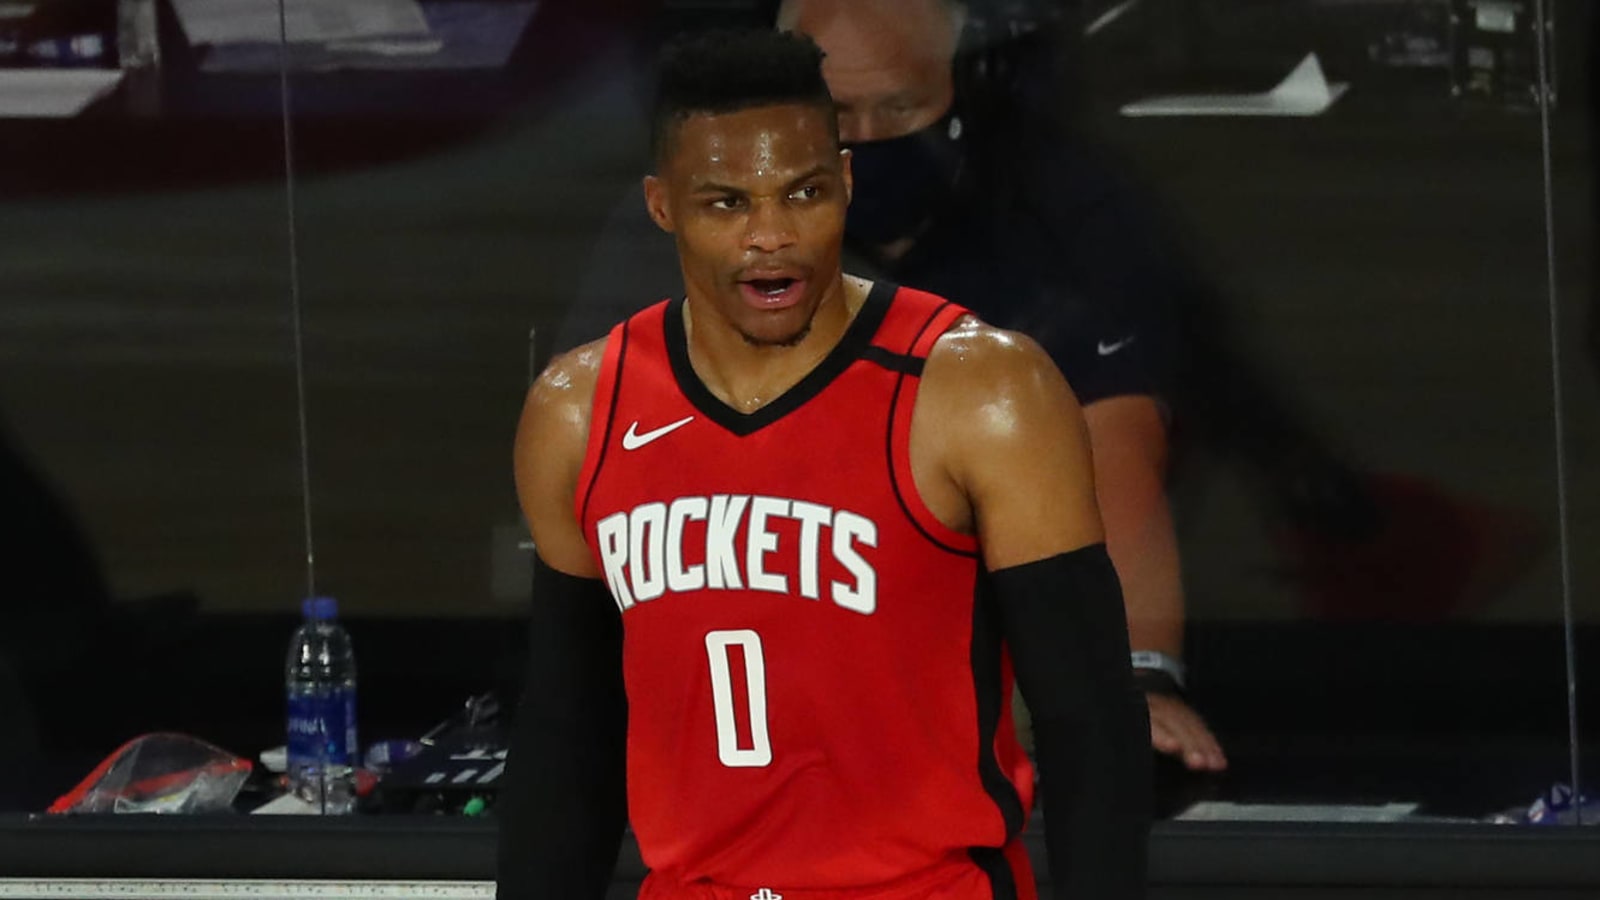 Russell Westbrook 'explosive as ever' in Rockets' scrimmage